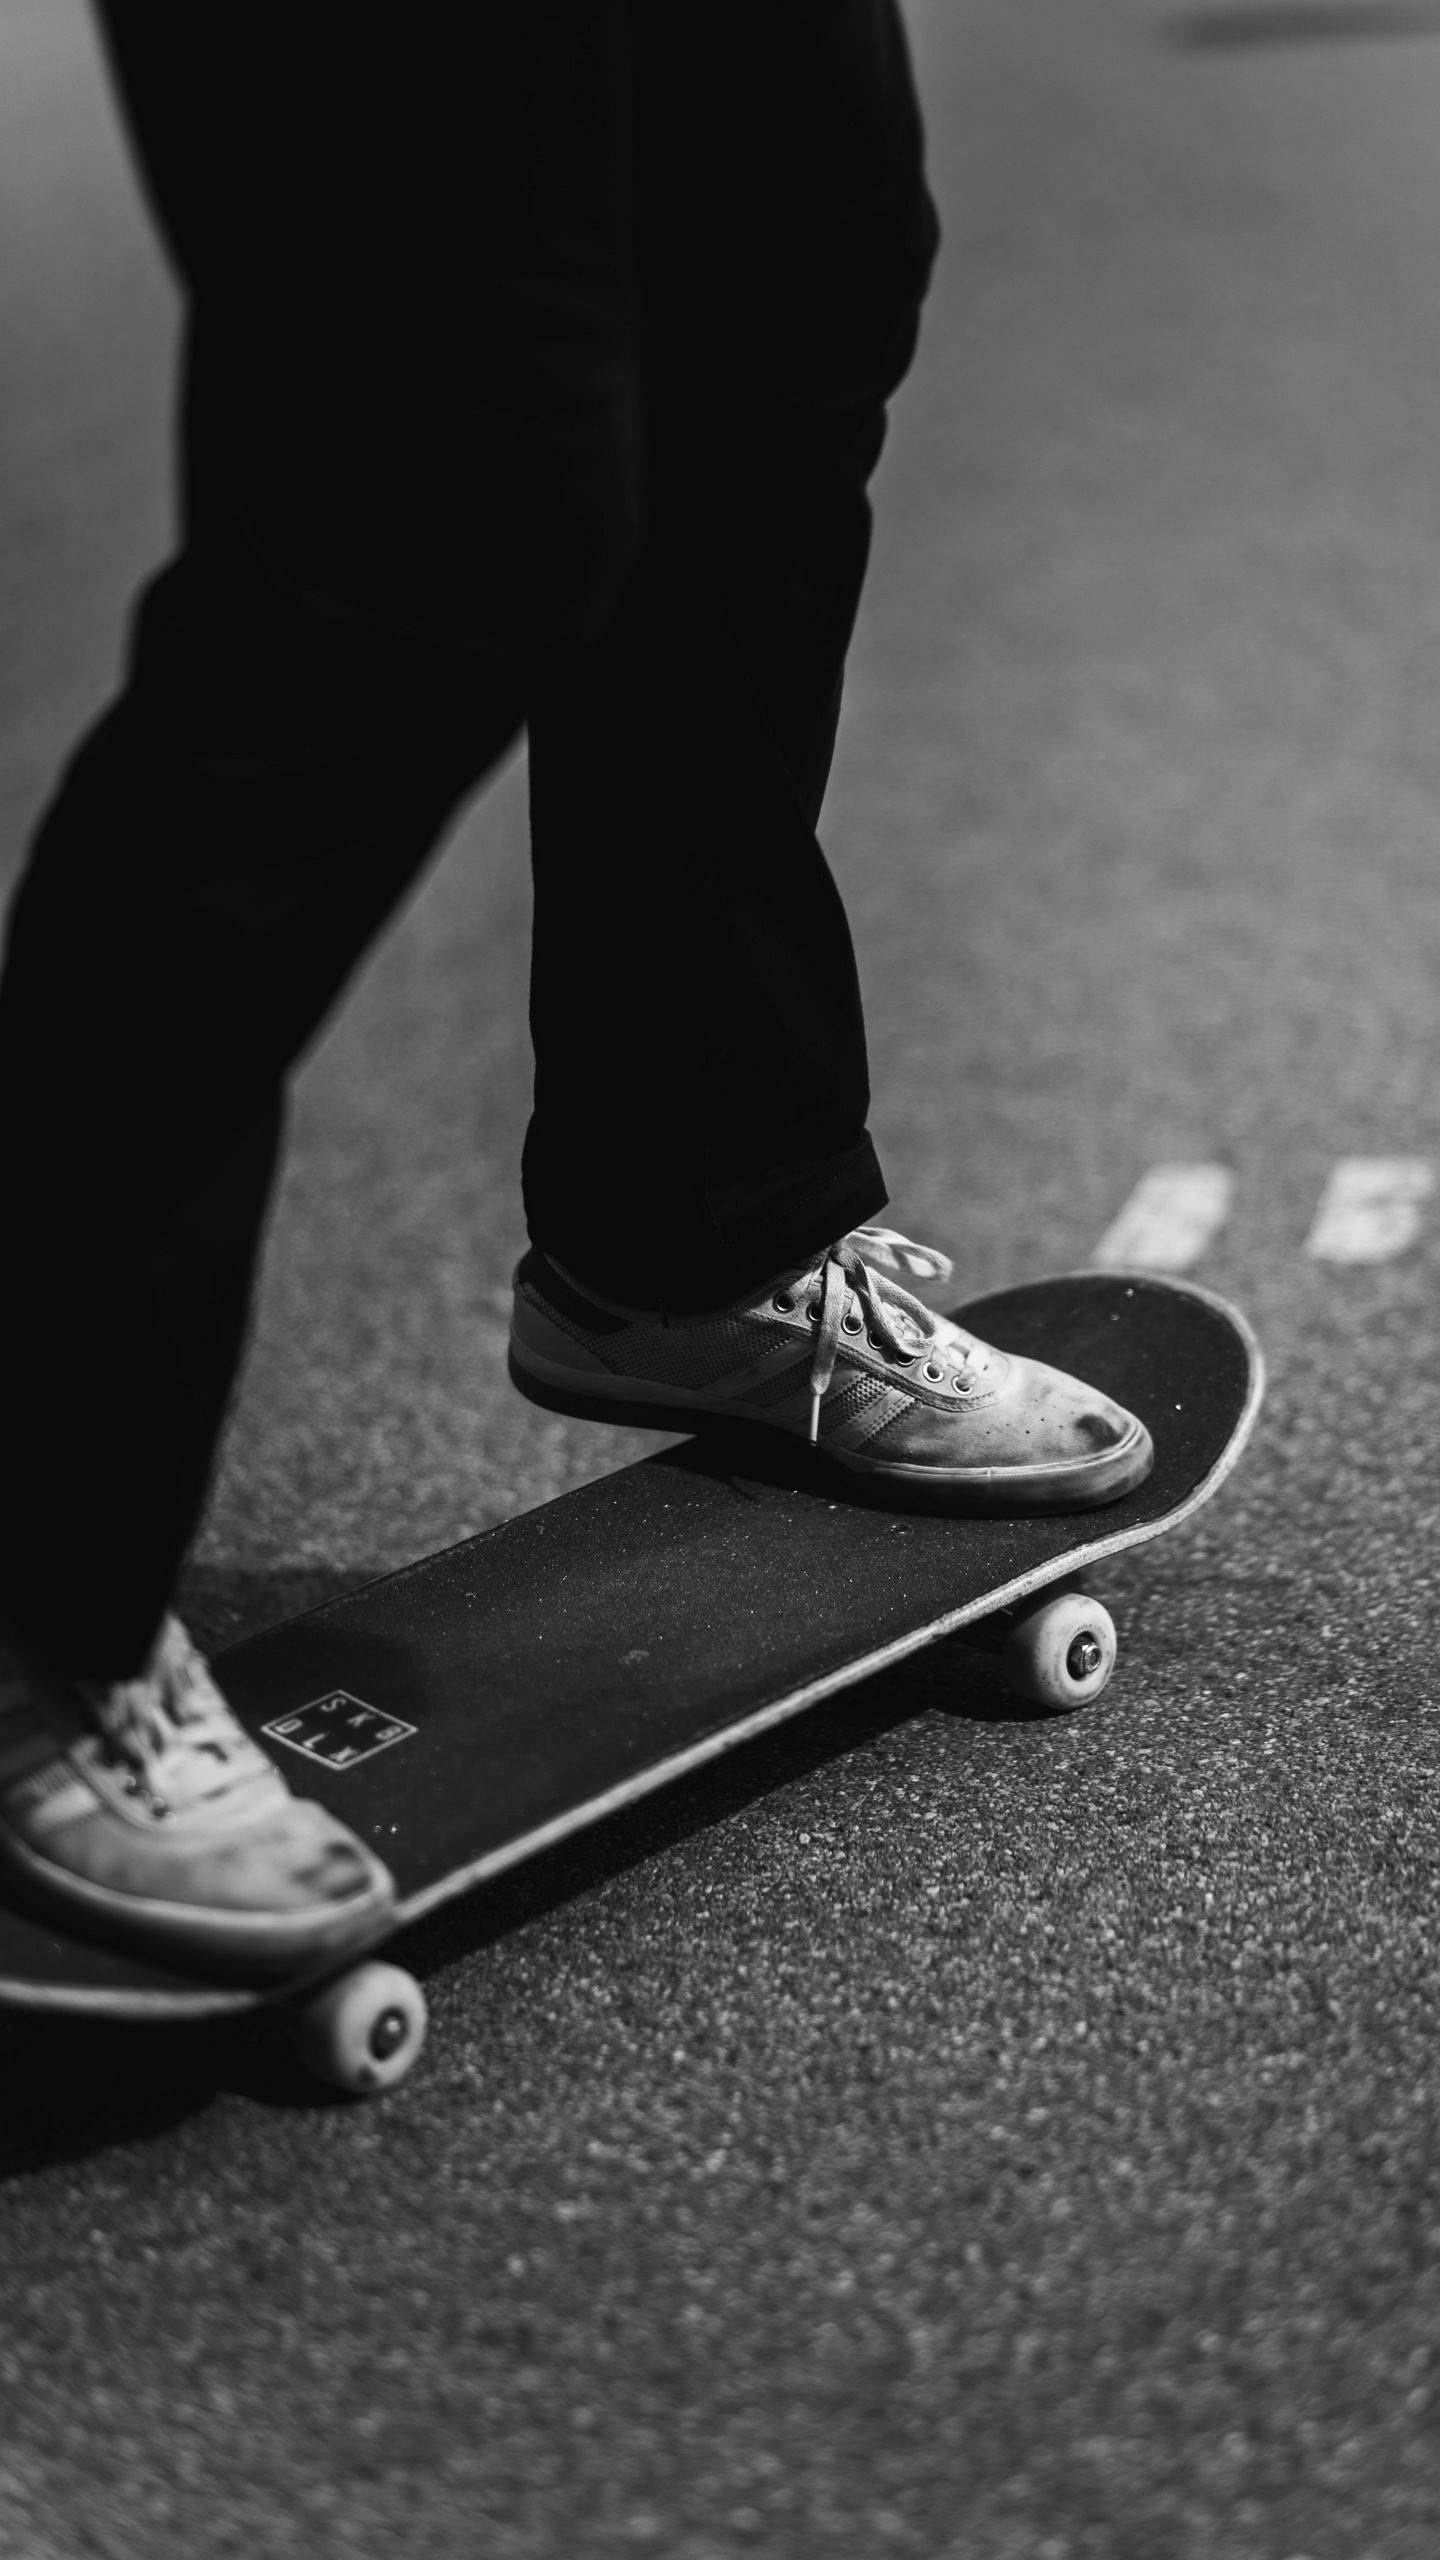 A person wearing white shoes is riding a skateboard on the street. - Skater